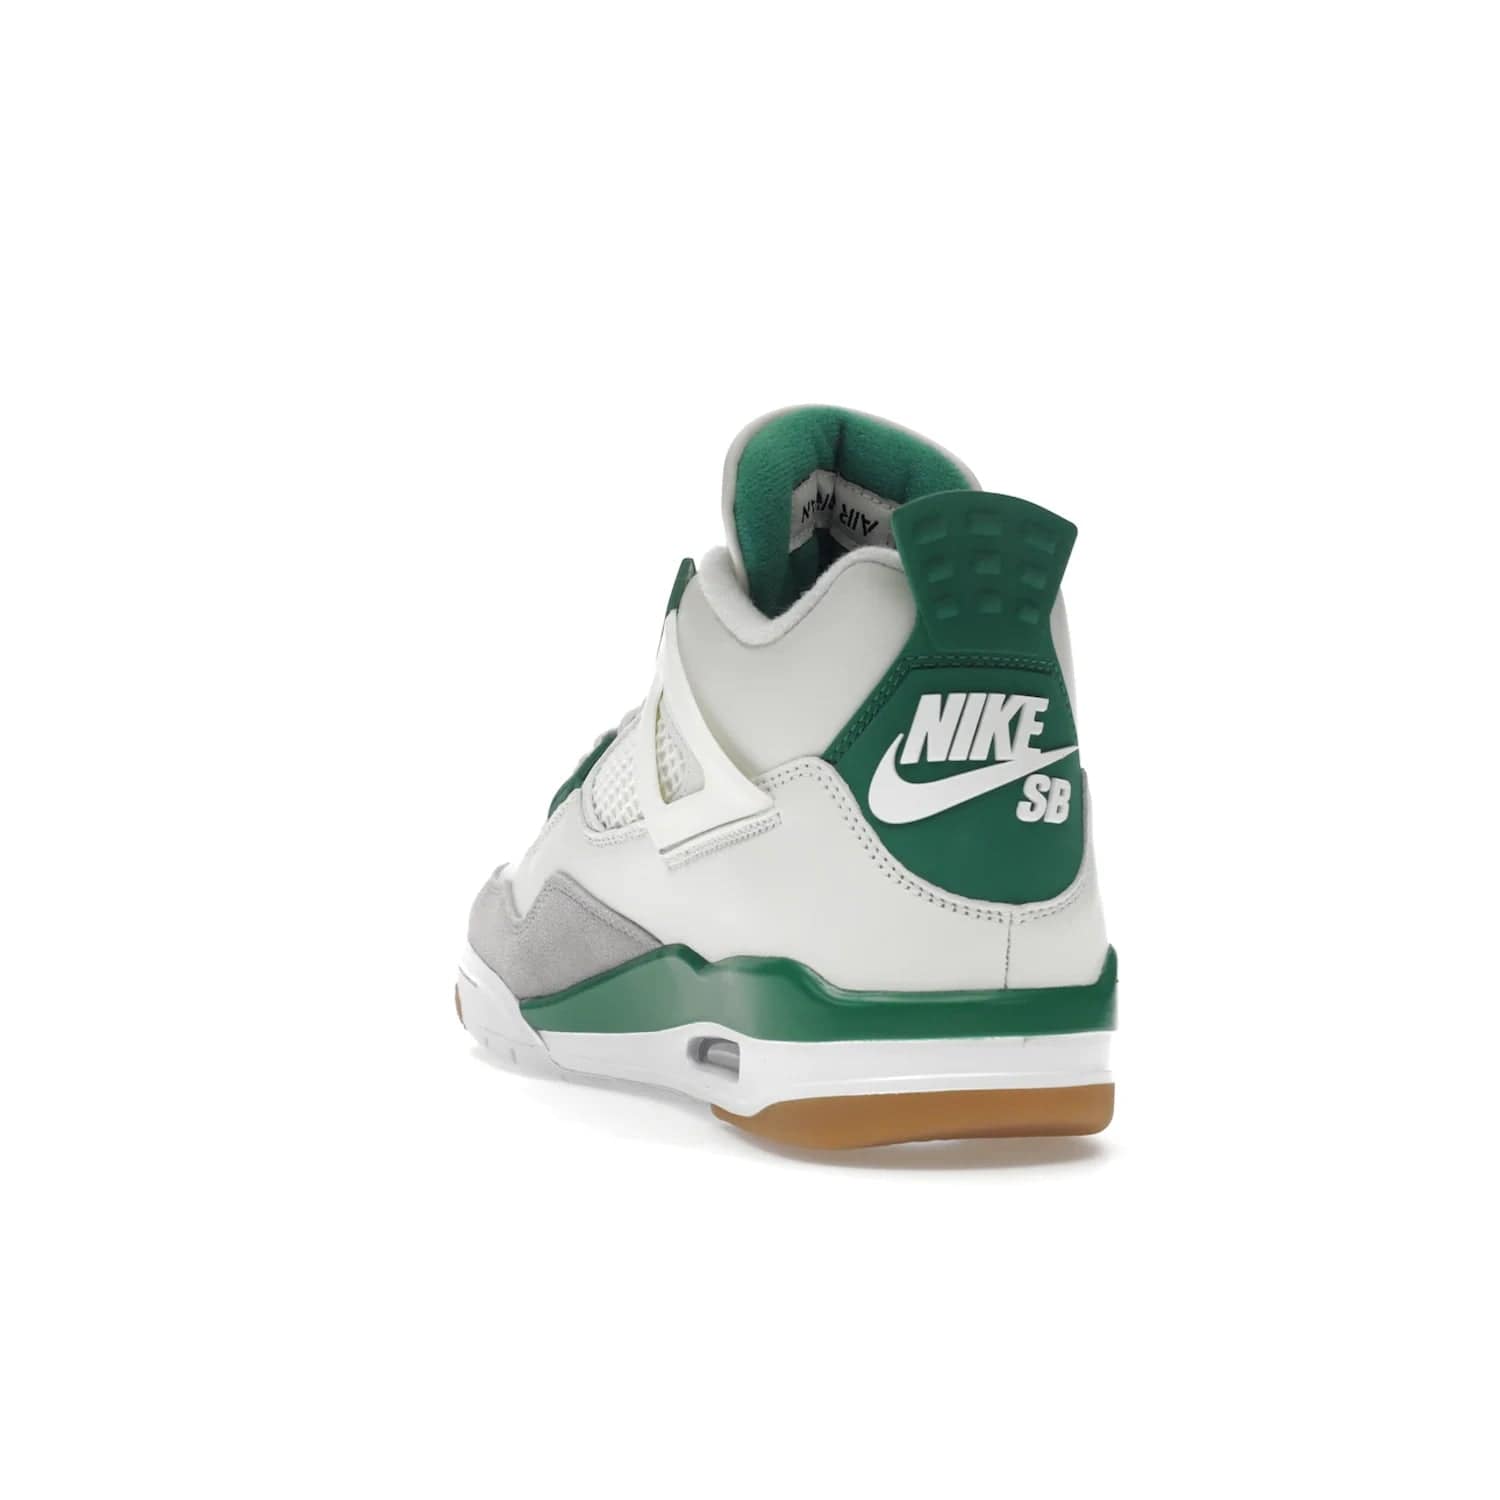 Jordan 4 Retro SB Pine Green - Image 26 - Only at www.BallersClubKickz.com - A white leather upper combined with a Neutral Grey suede mudguard gives this limited Air Jordan 4 Retro SB Pine Green sneaker its unmistakable style. Released March 20, 2023, the Jordan 4 Retro SB features a white and Pine Green midsole plus a red air unit with a gum outsole for grip. The perfect blend of Nike SB skateboarding and Jordan 4 classic design.